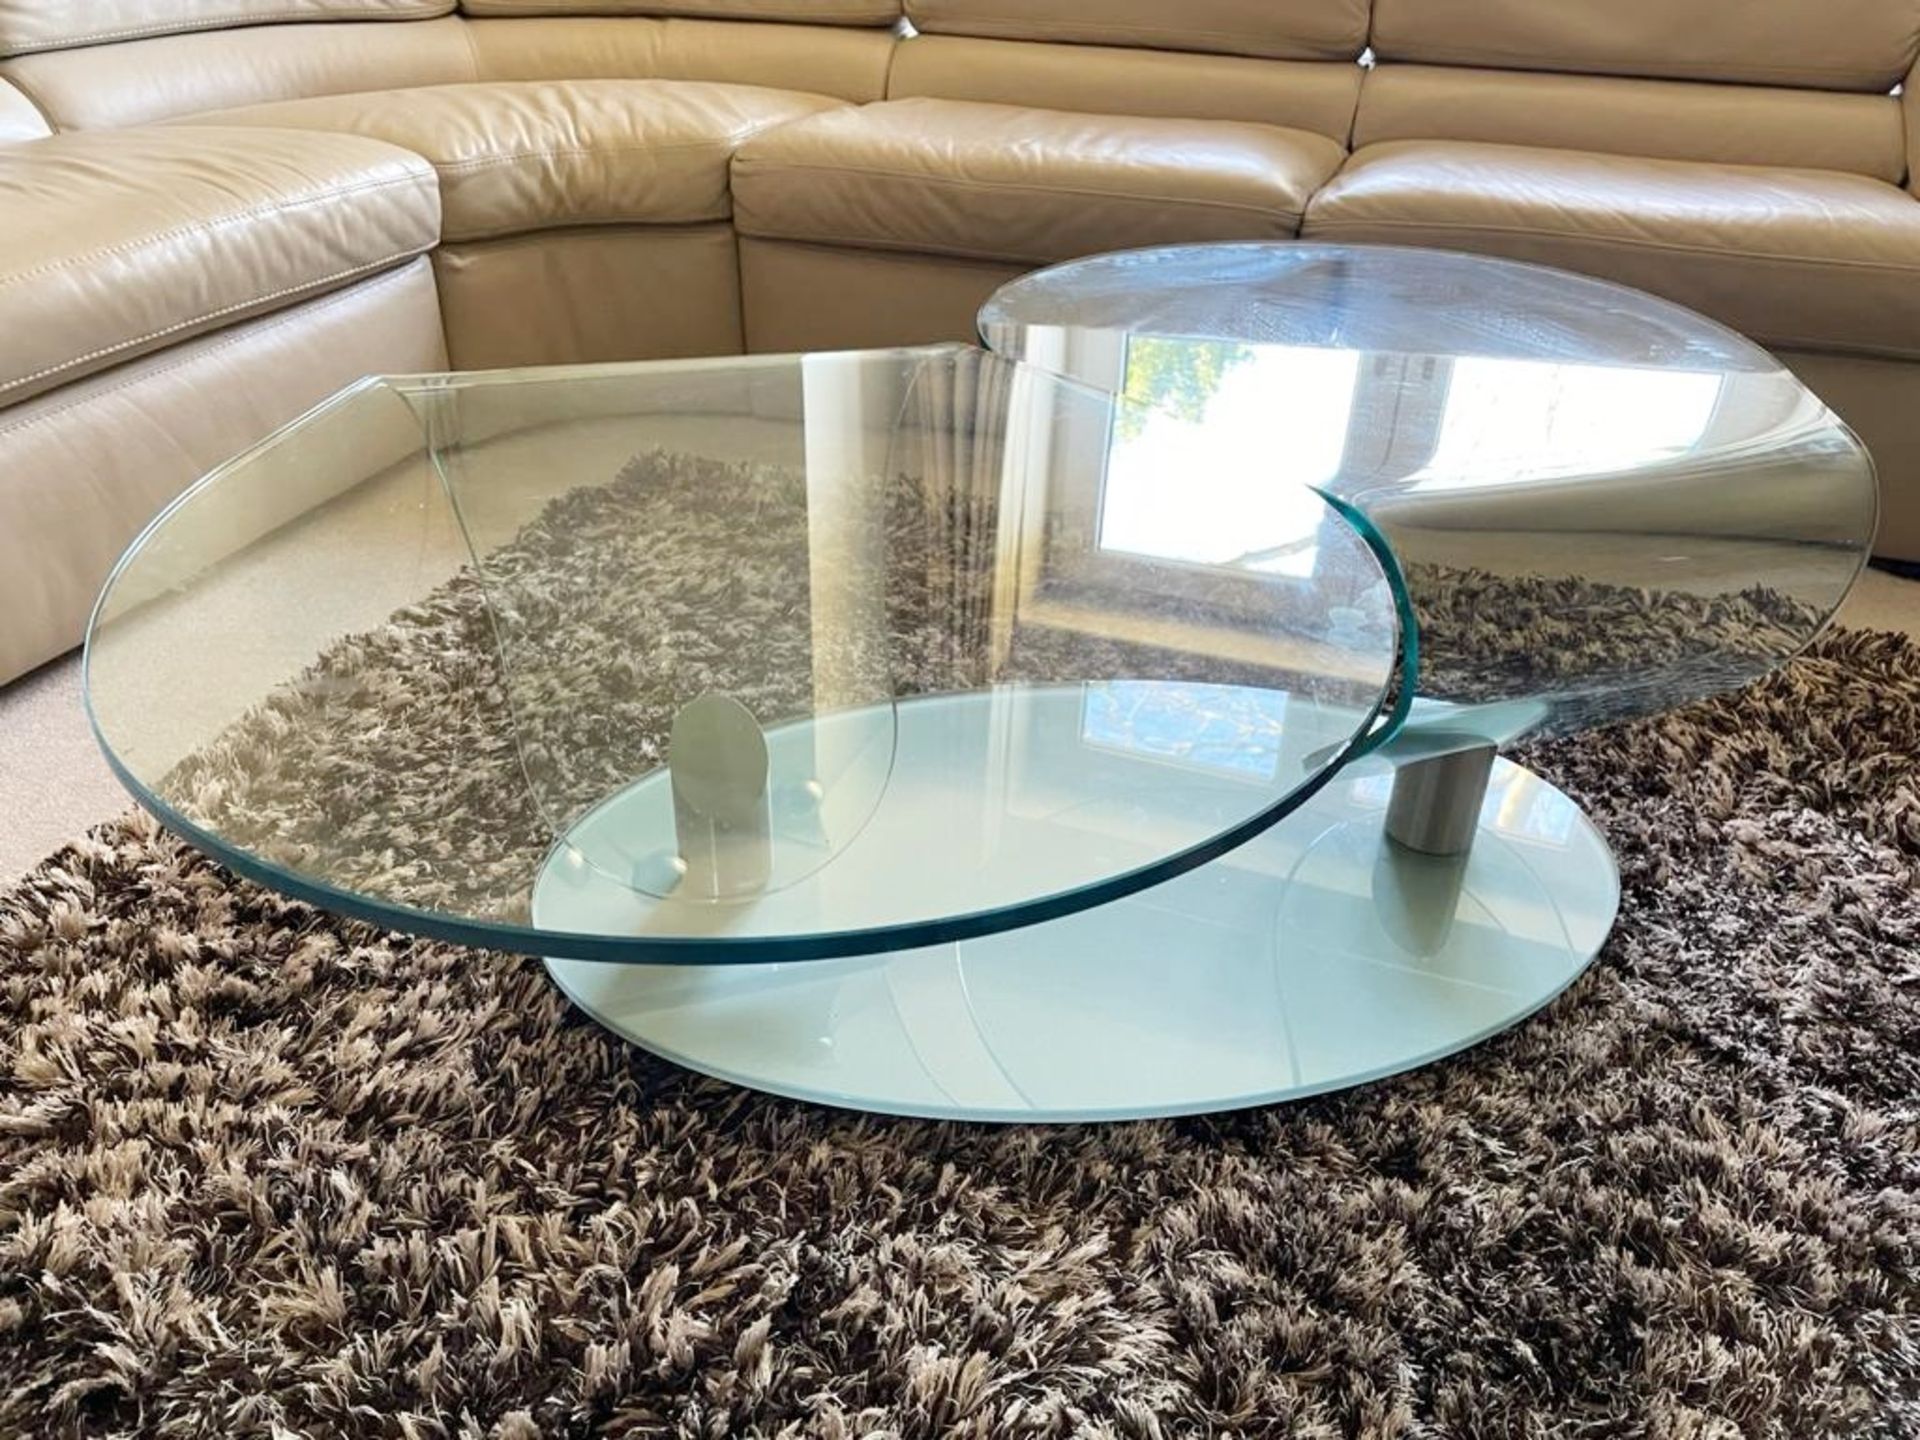 1 x Contemporary Extending Coffee Table With Two Glass Swivel Bases and Smoked Glass Base - Size: - Image 4 of 5